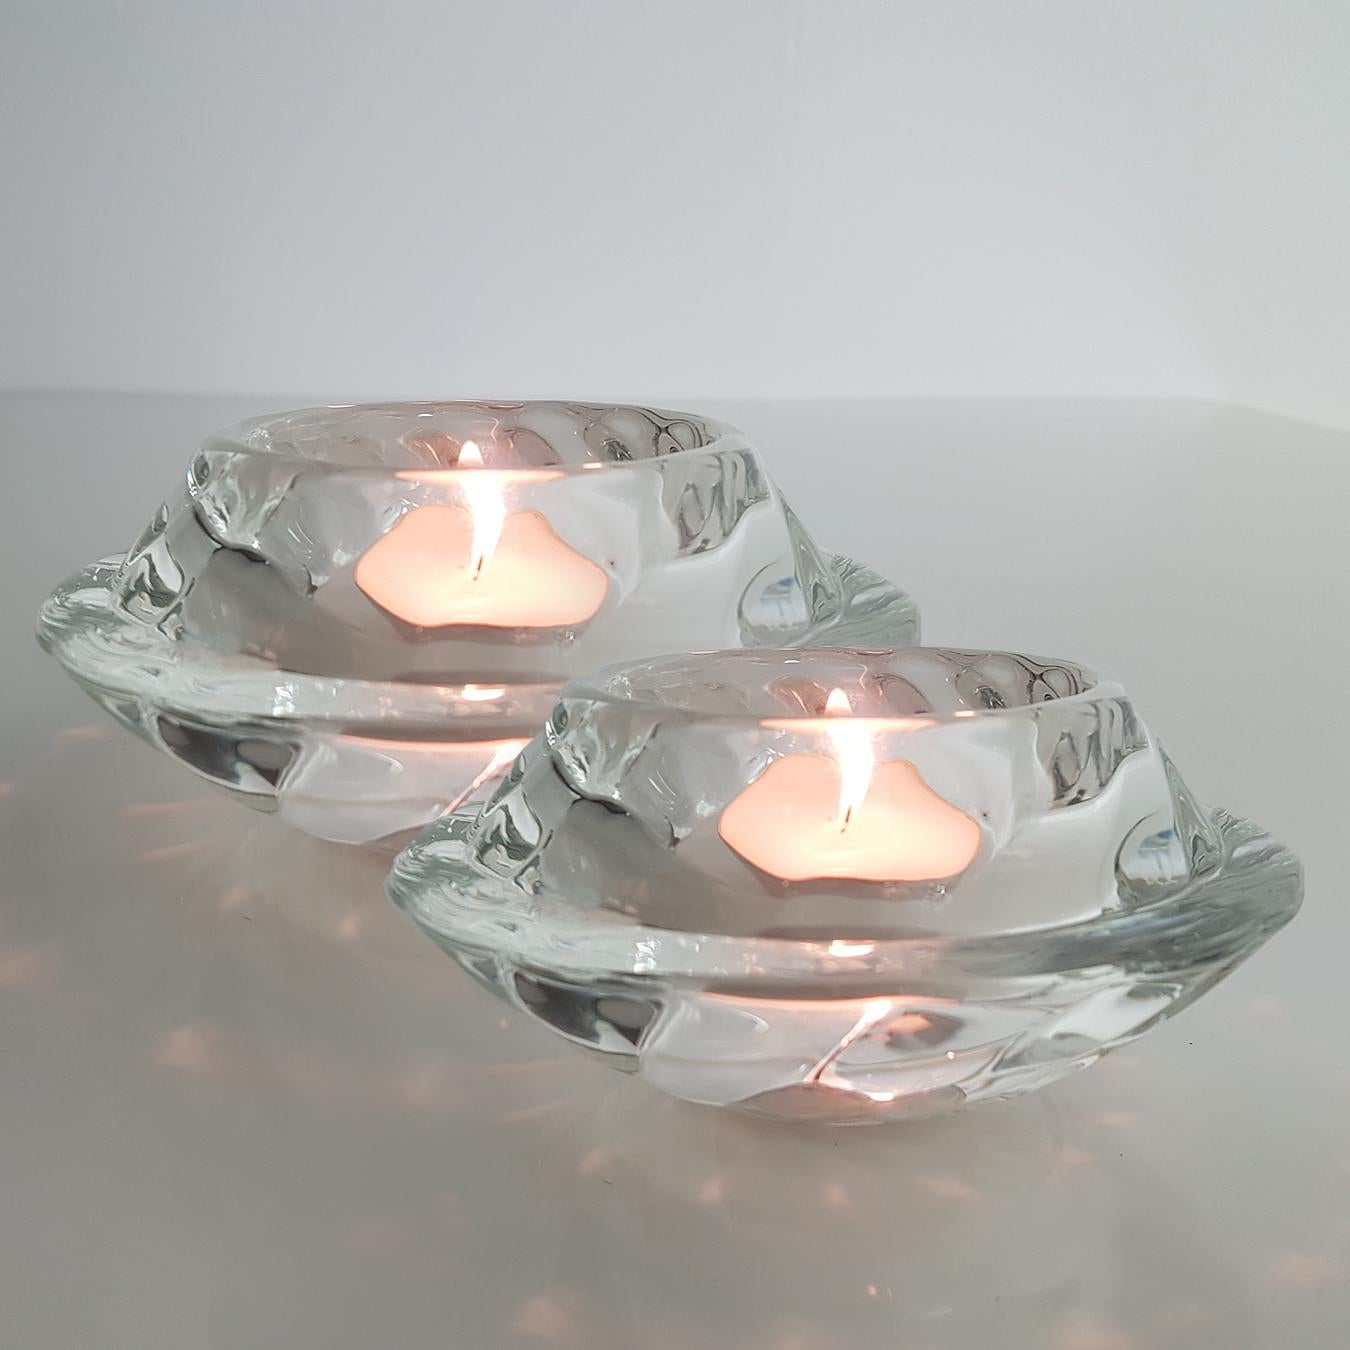 This pair of votive candleholders designed by Royal Copenhagen are heavy, substantial and gorgeous. Inspired by nature. Also gorgeous on a holiday table! The capriole pattern is a gift and hollow ware pattern that features bowls and votive